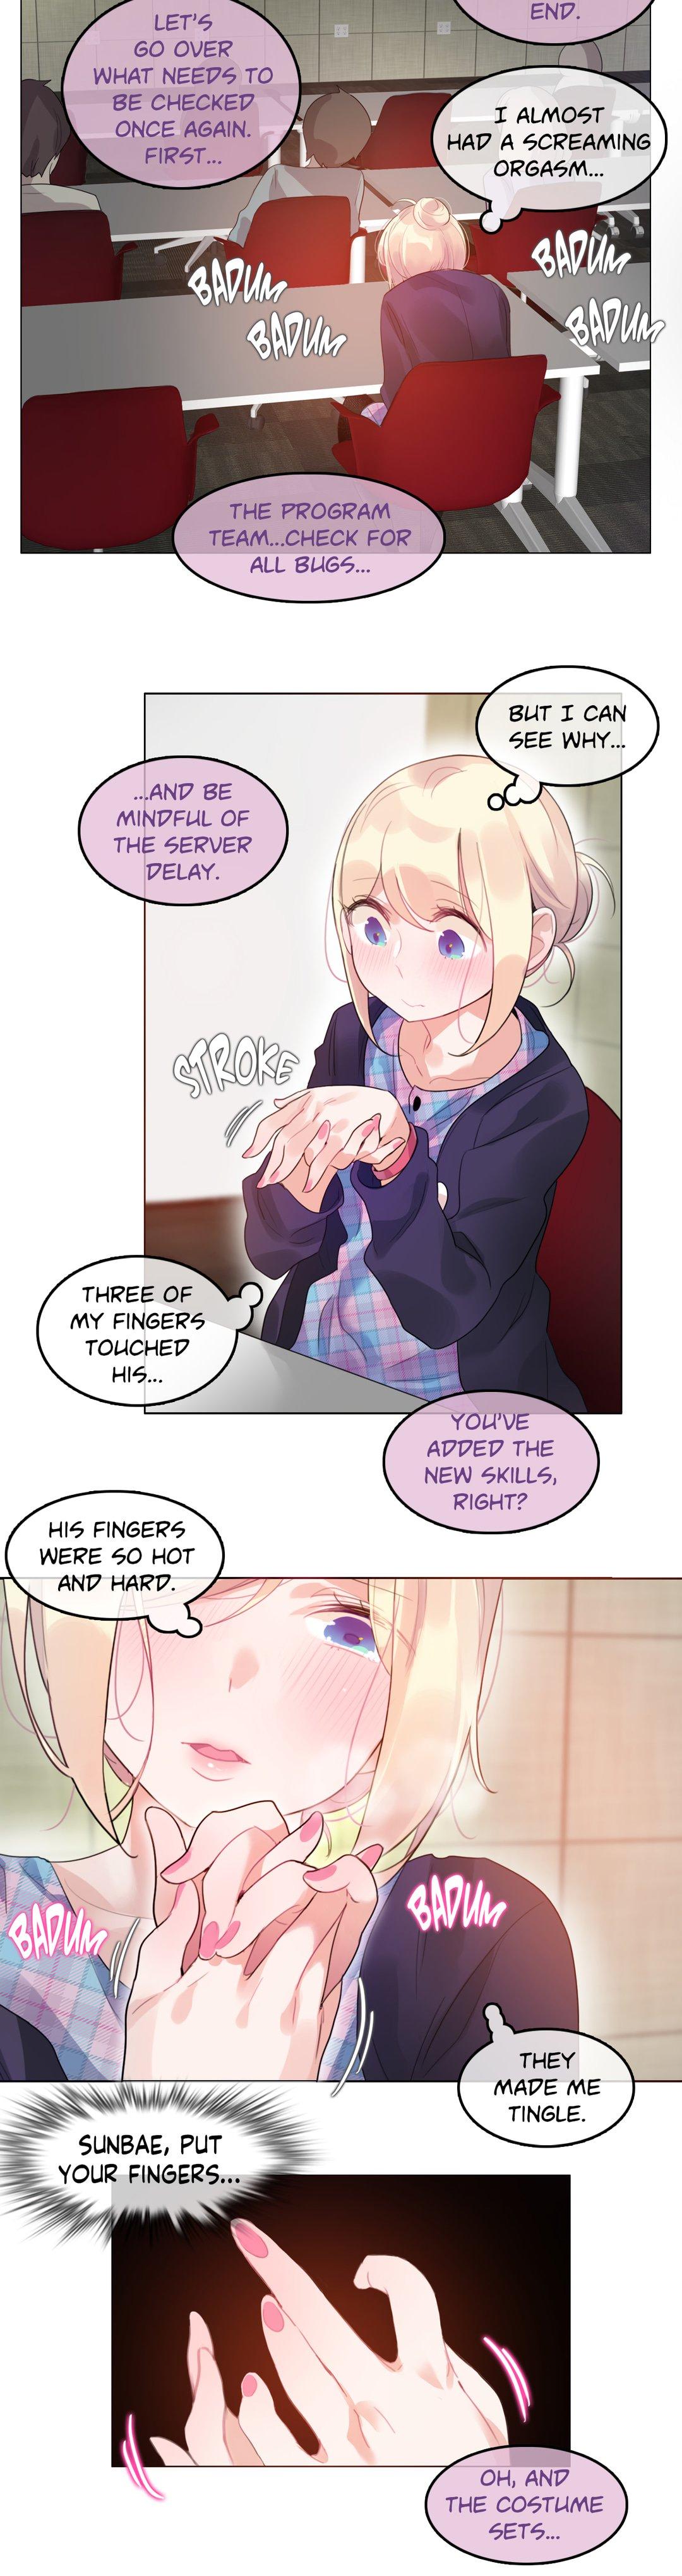 A Pervert's Daily Life • Chapter 51-55 46